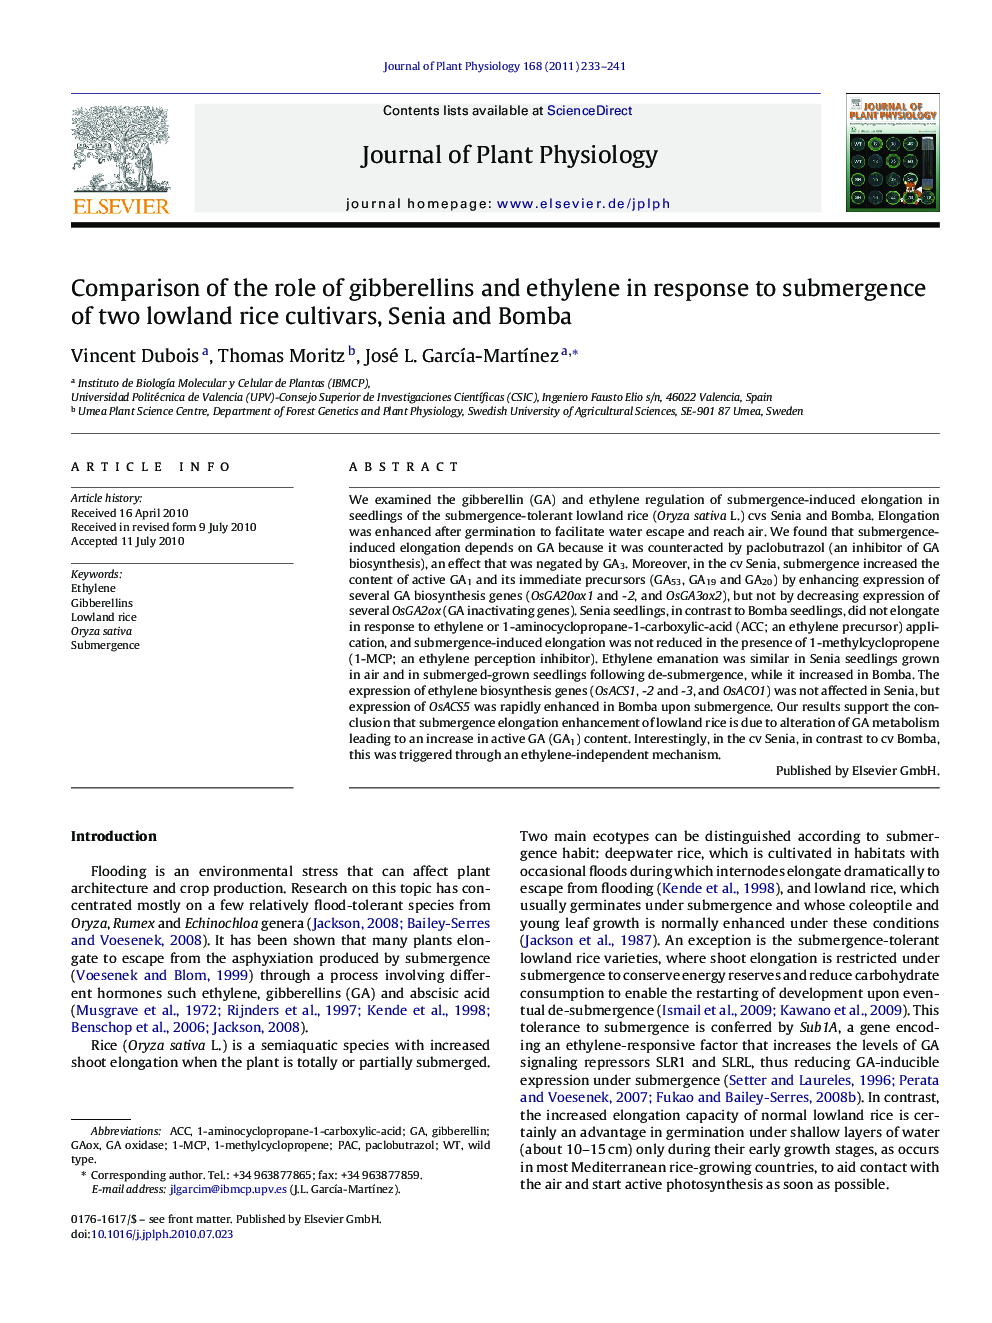 Comparison of the role of gibberellins and ethylene in response to submergence of two lowland rice cultivars, Senia and Bomba